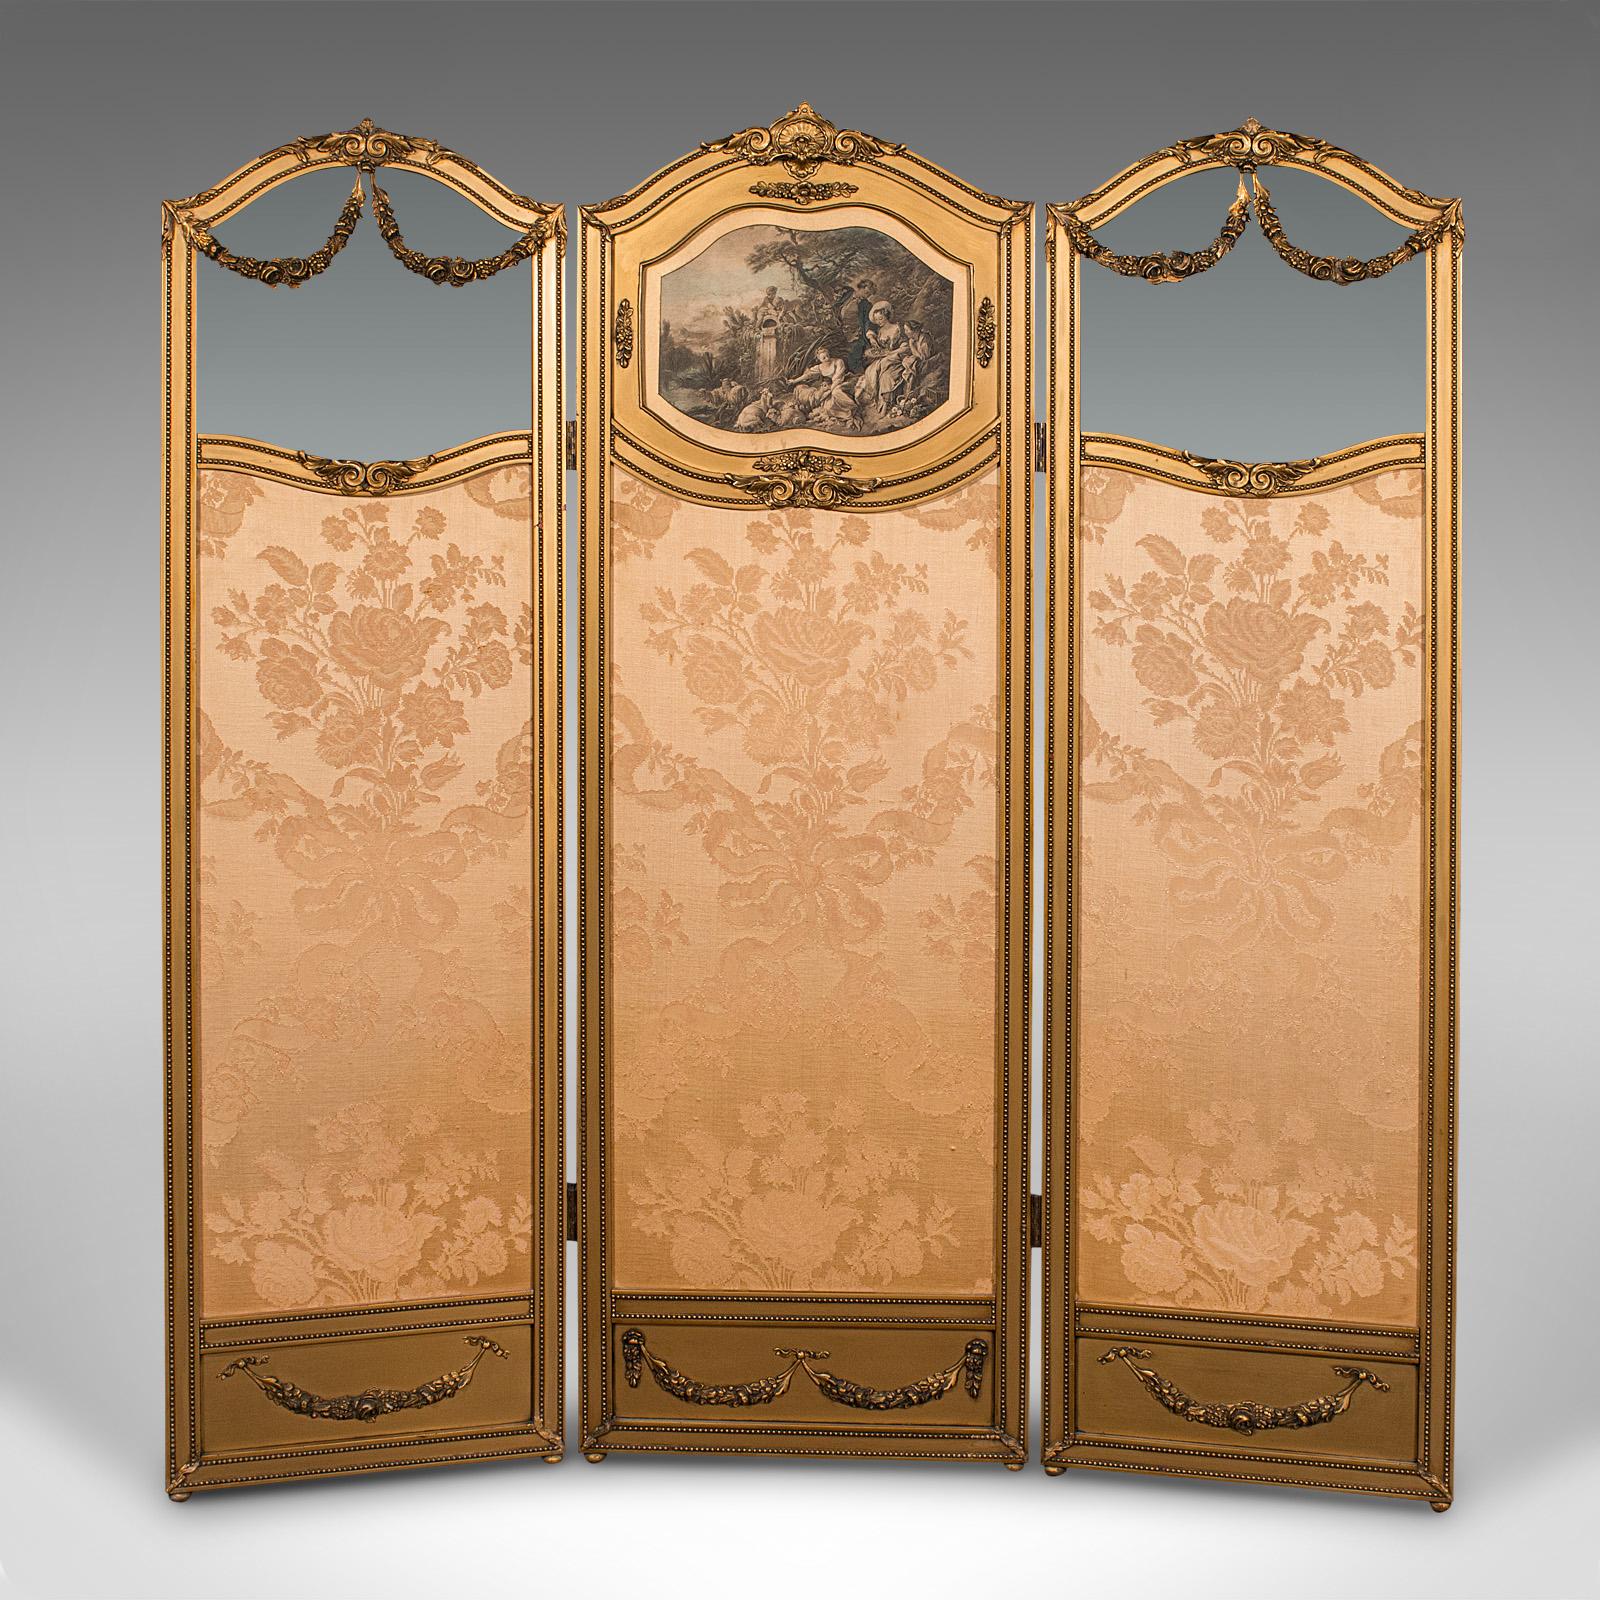 This is an antique three panel dressing screen. A French, giltwood and glass room divider, dating to the late Victorian period, circa 1900.

Strikingly decorative screen with great colour and detail
Displays a desirable aged patina and in good order